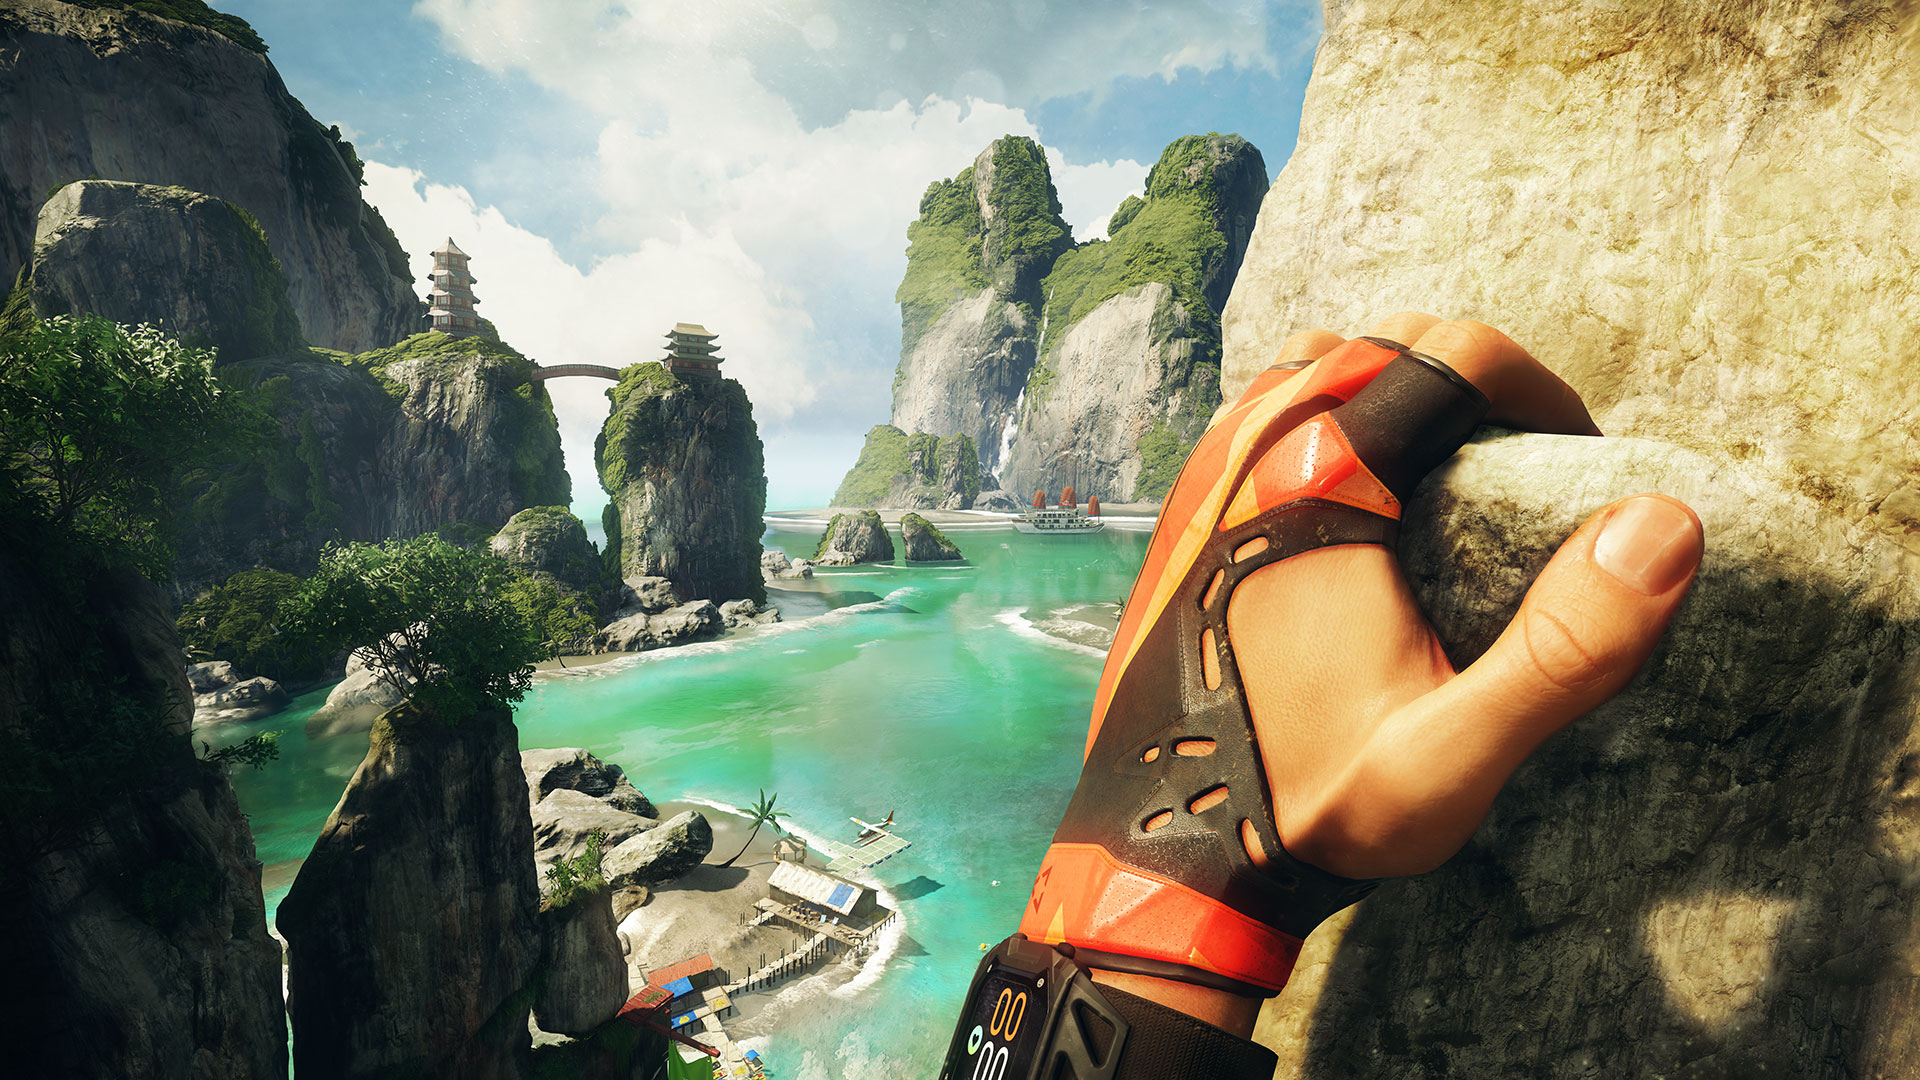 Hands-on: Crytek's 'The Climb' with Oculus Touch Feels Like an Entirely New Experience – Road to VR